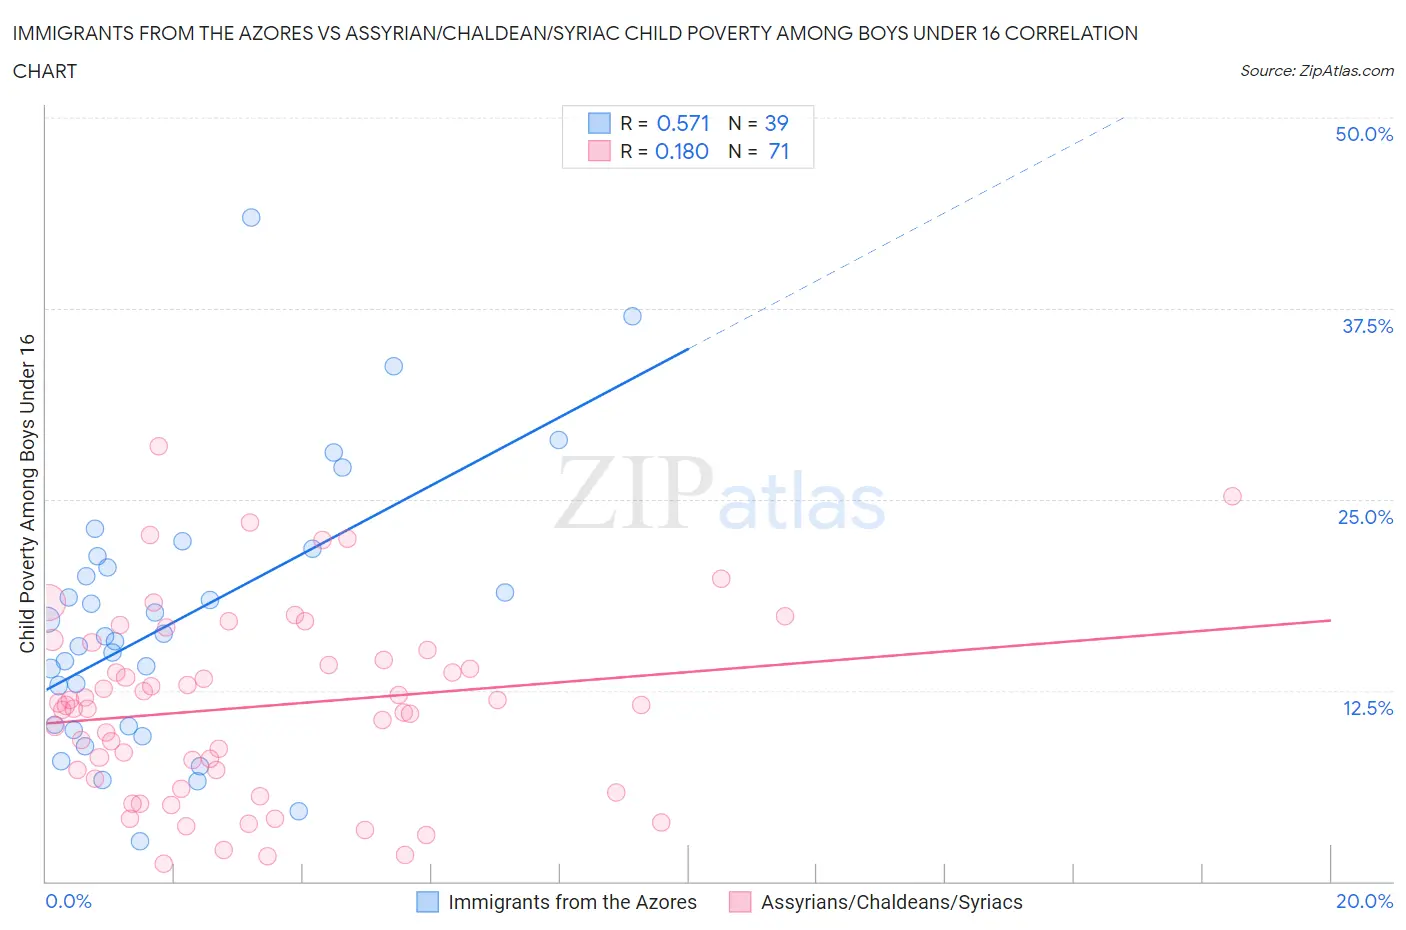 Immigrants from the Azores vs Assyrian/Chaldean/Syriac Child Poverty Among Boys Under 16